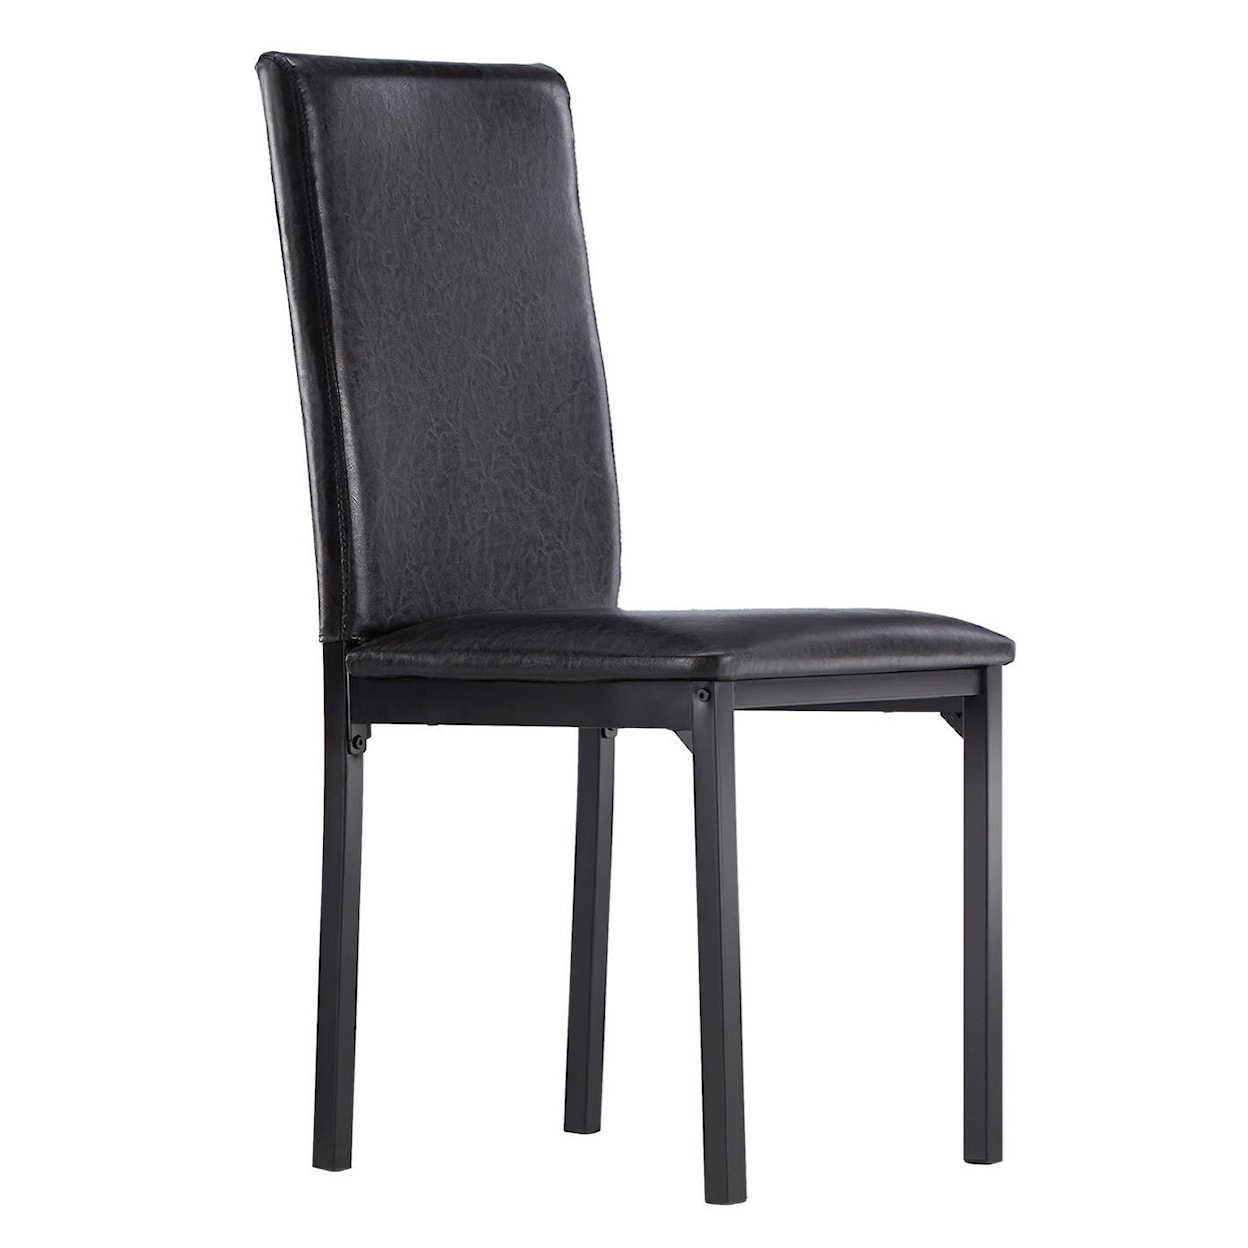 Homelegance Tempe Dining Side Chair